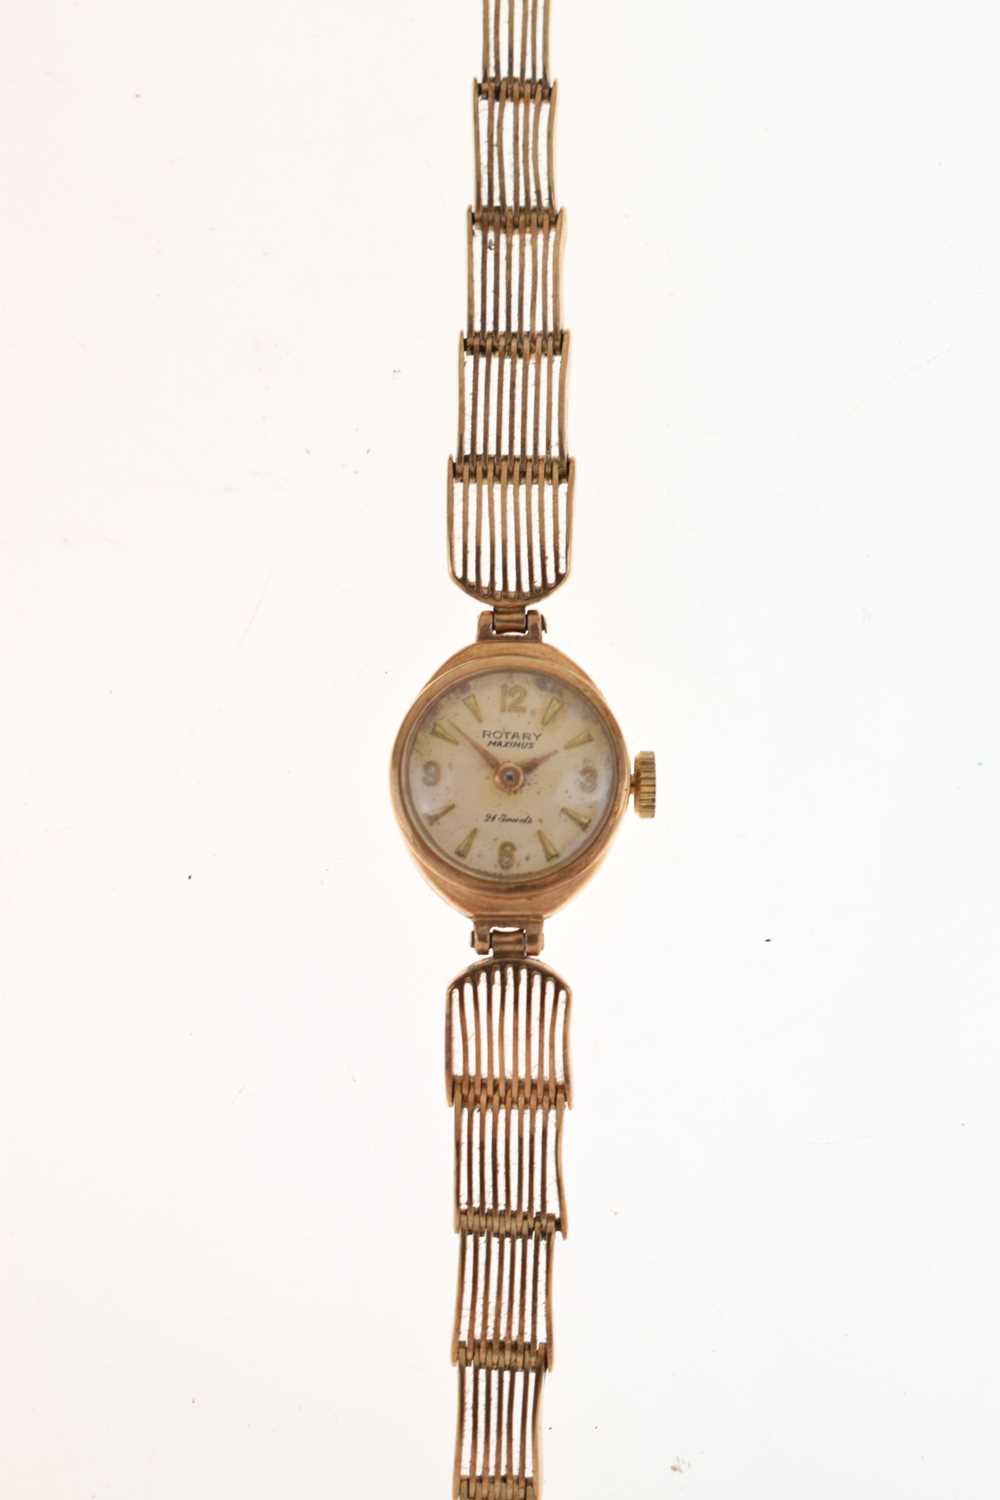 Rotary - Lady's 9ct gold cocktail watch - Image 9 of 9